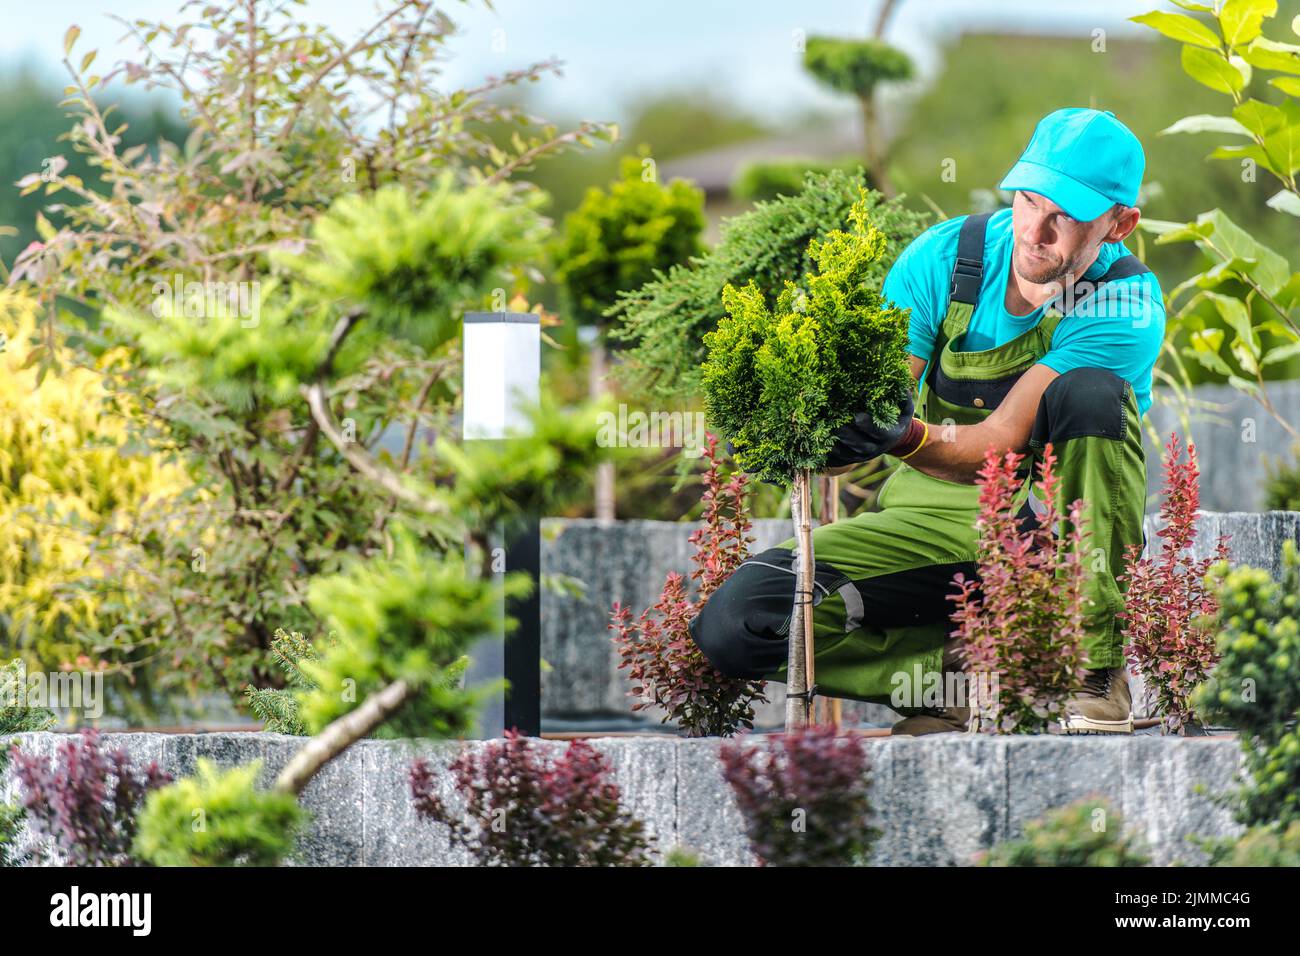 Caucasian Male Landscape Gardener Staking Up and Securing a Fleshly Planted Green Shrub to Support Its Proper Growth. Professional Landscape Design Th Stock Photo